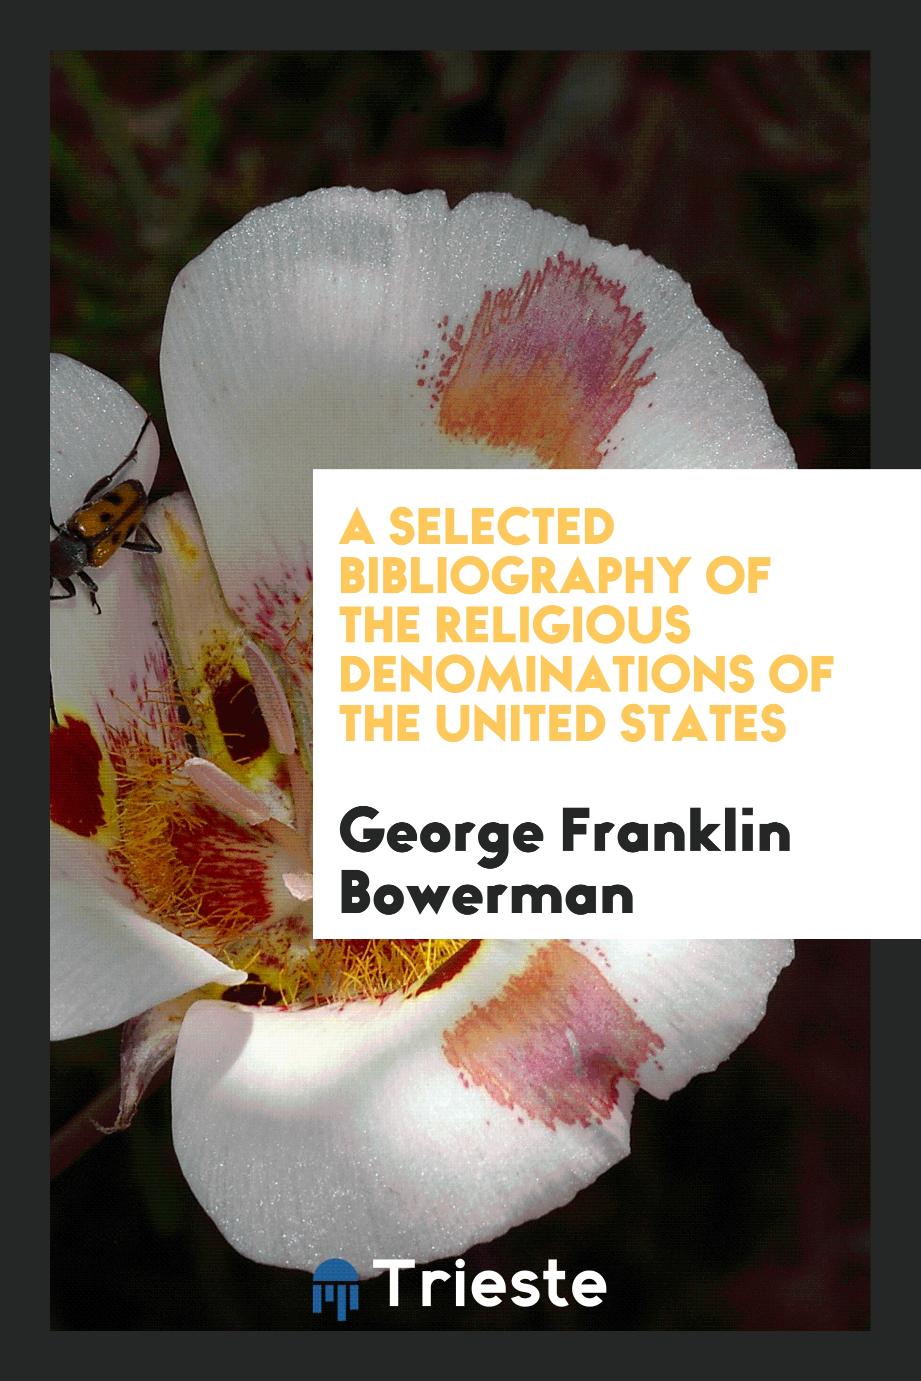 A Selected Bibliography of the Religious Denominations of the United States